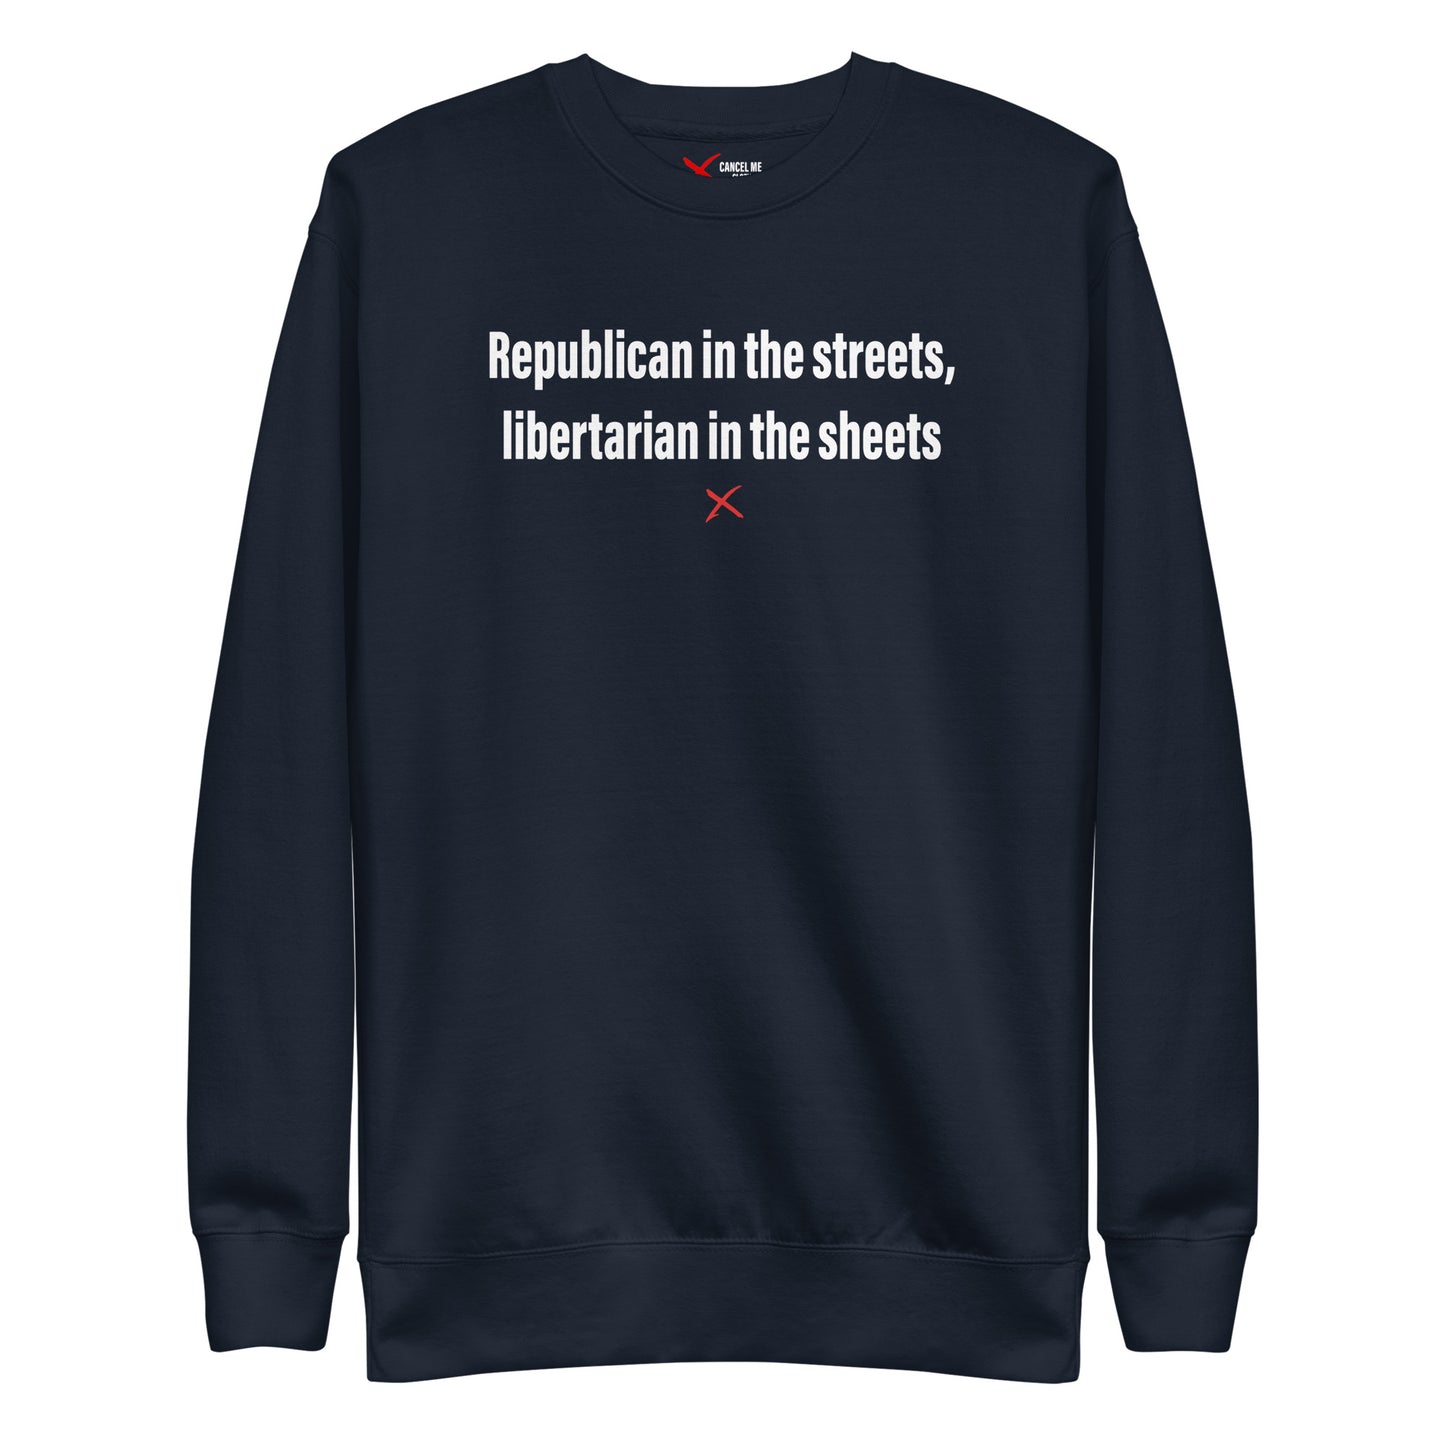 Republican in the streets, libertarian in the sheets - Sweatshirt